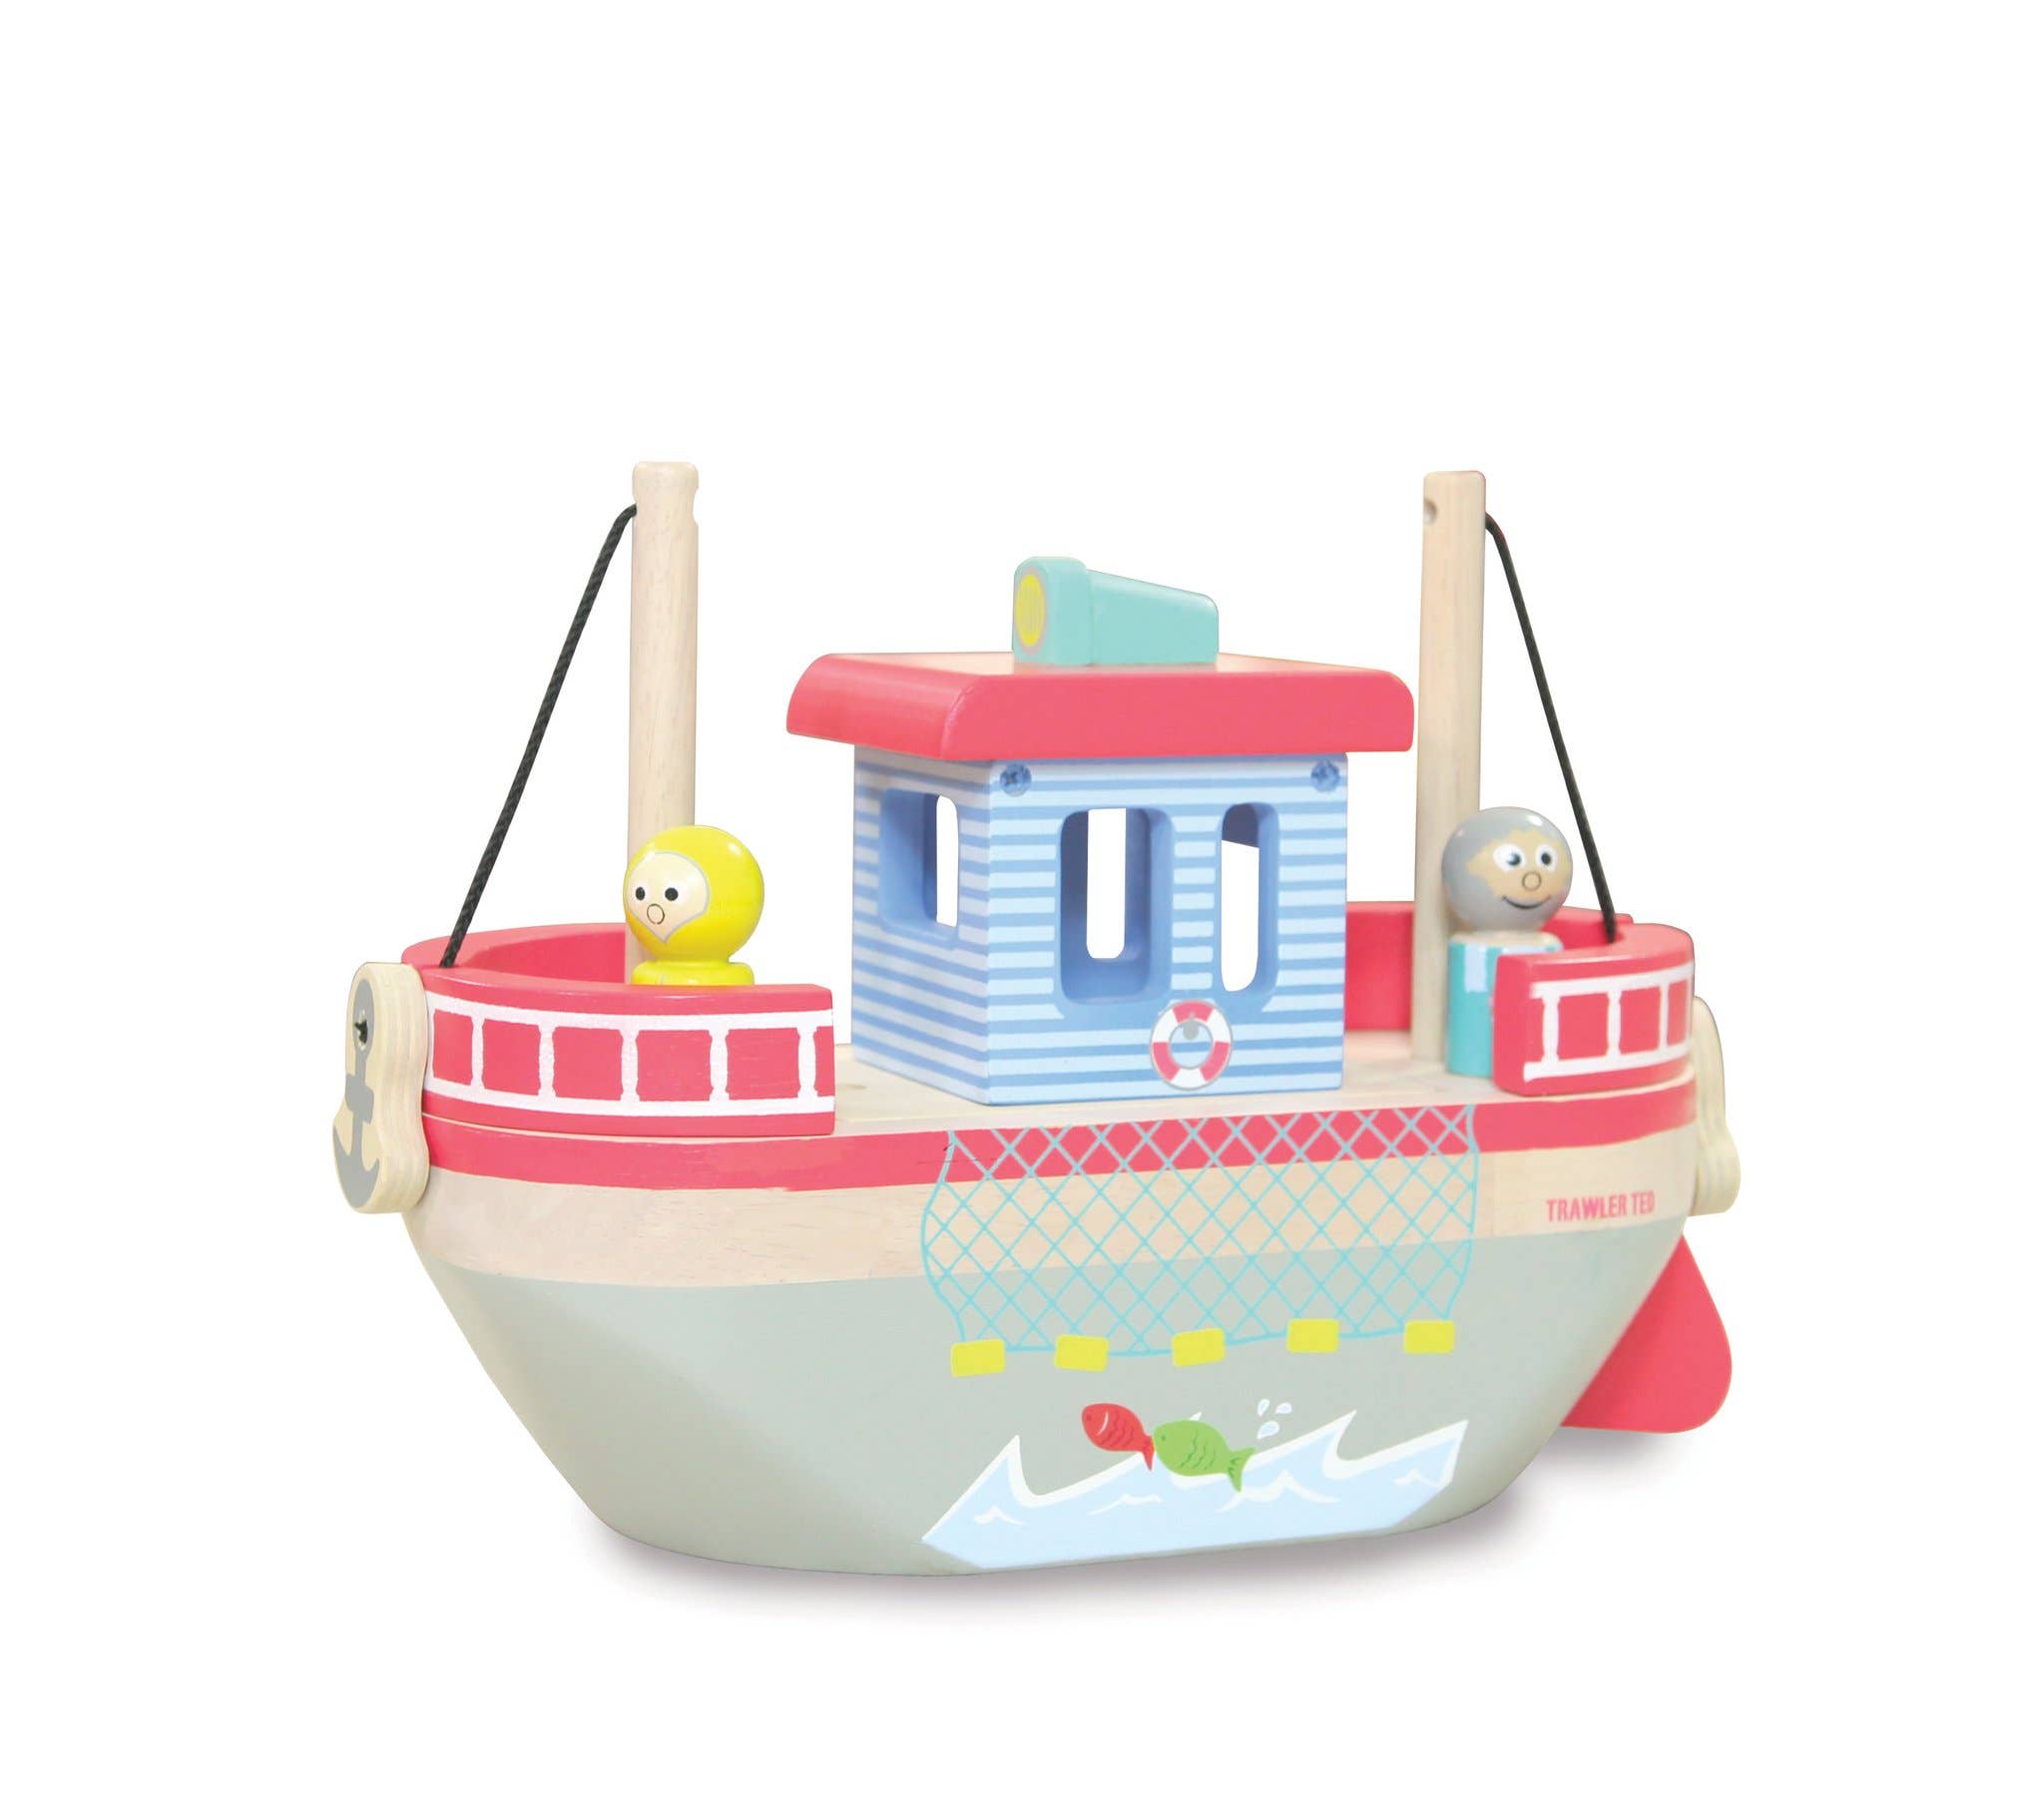 Trawler Ted Wooden Boat Toy Playset with Removable Passengers and Magnetic Fishing Game Including Fish for 2 3 4 Year Old Boy and Girls